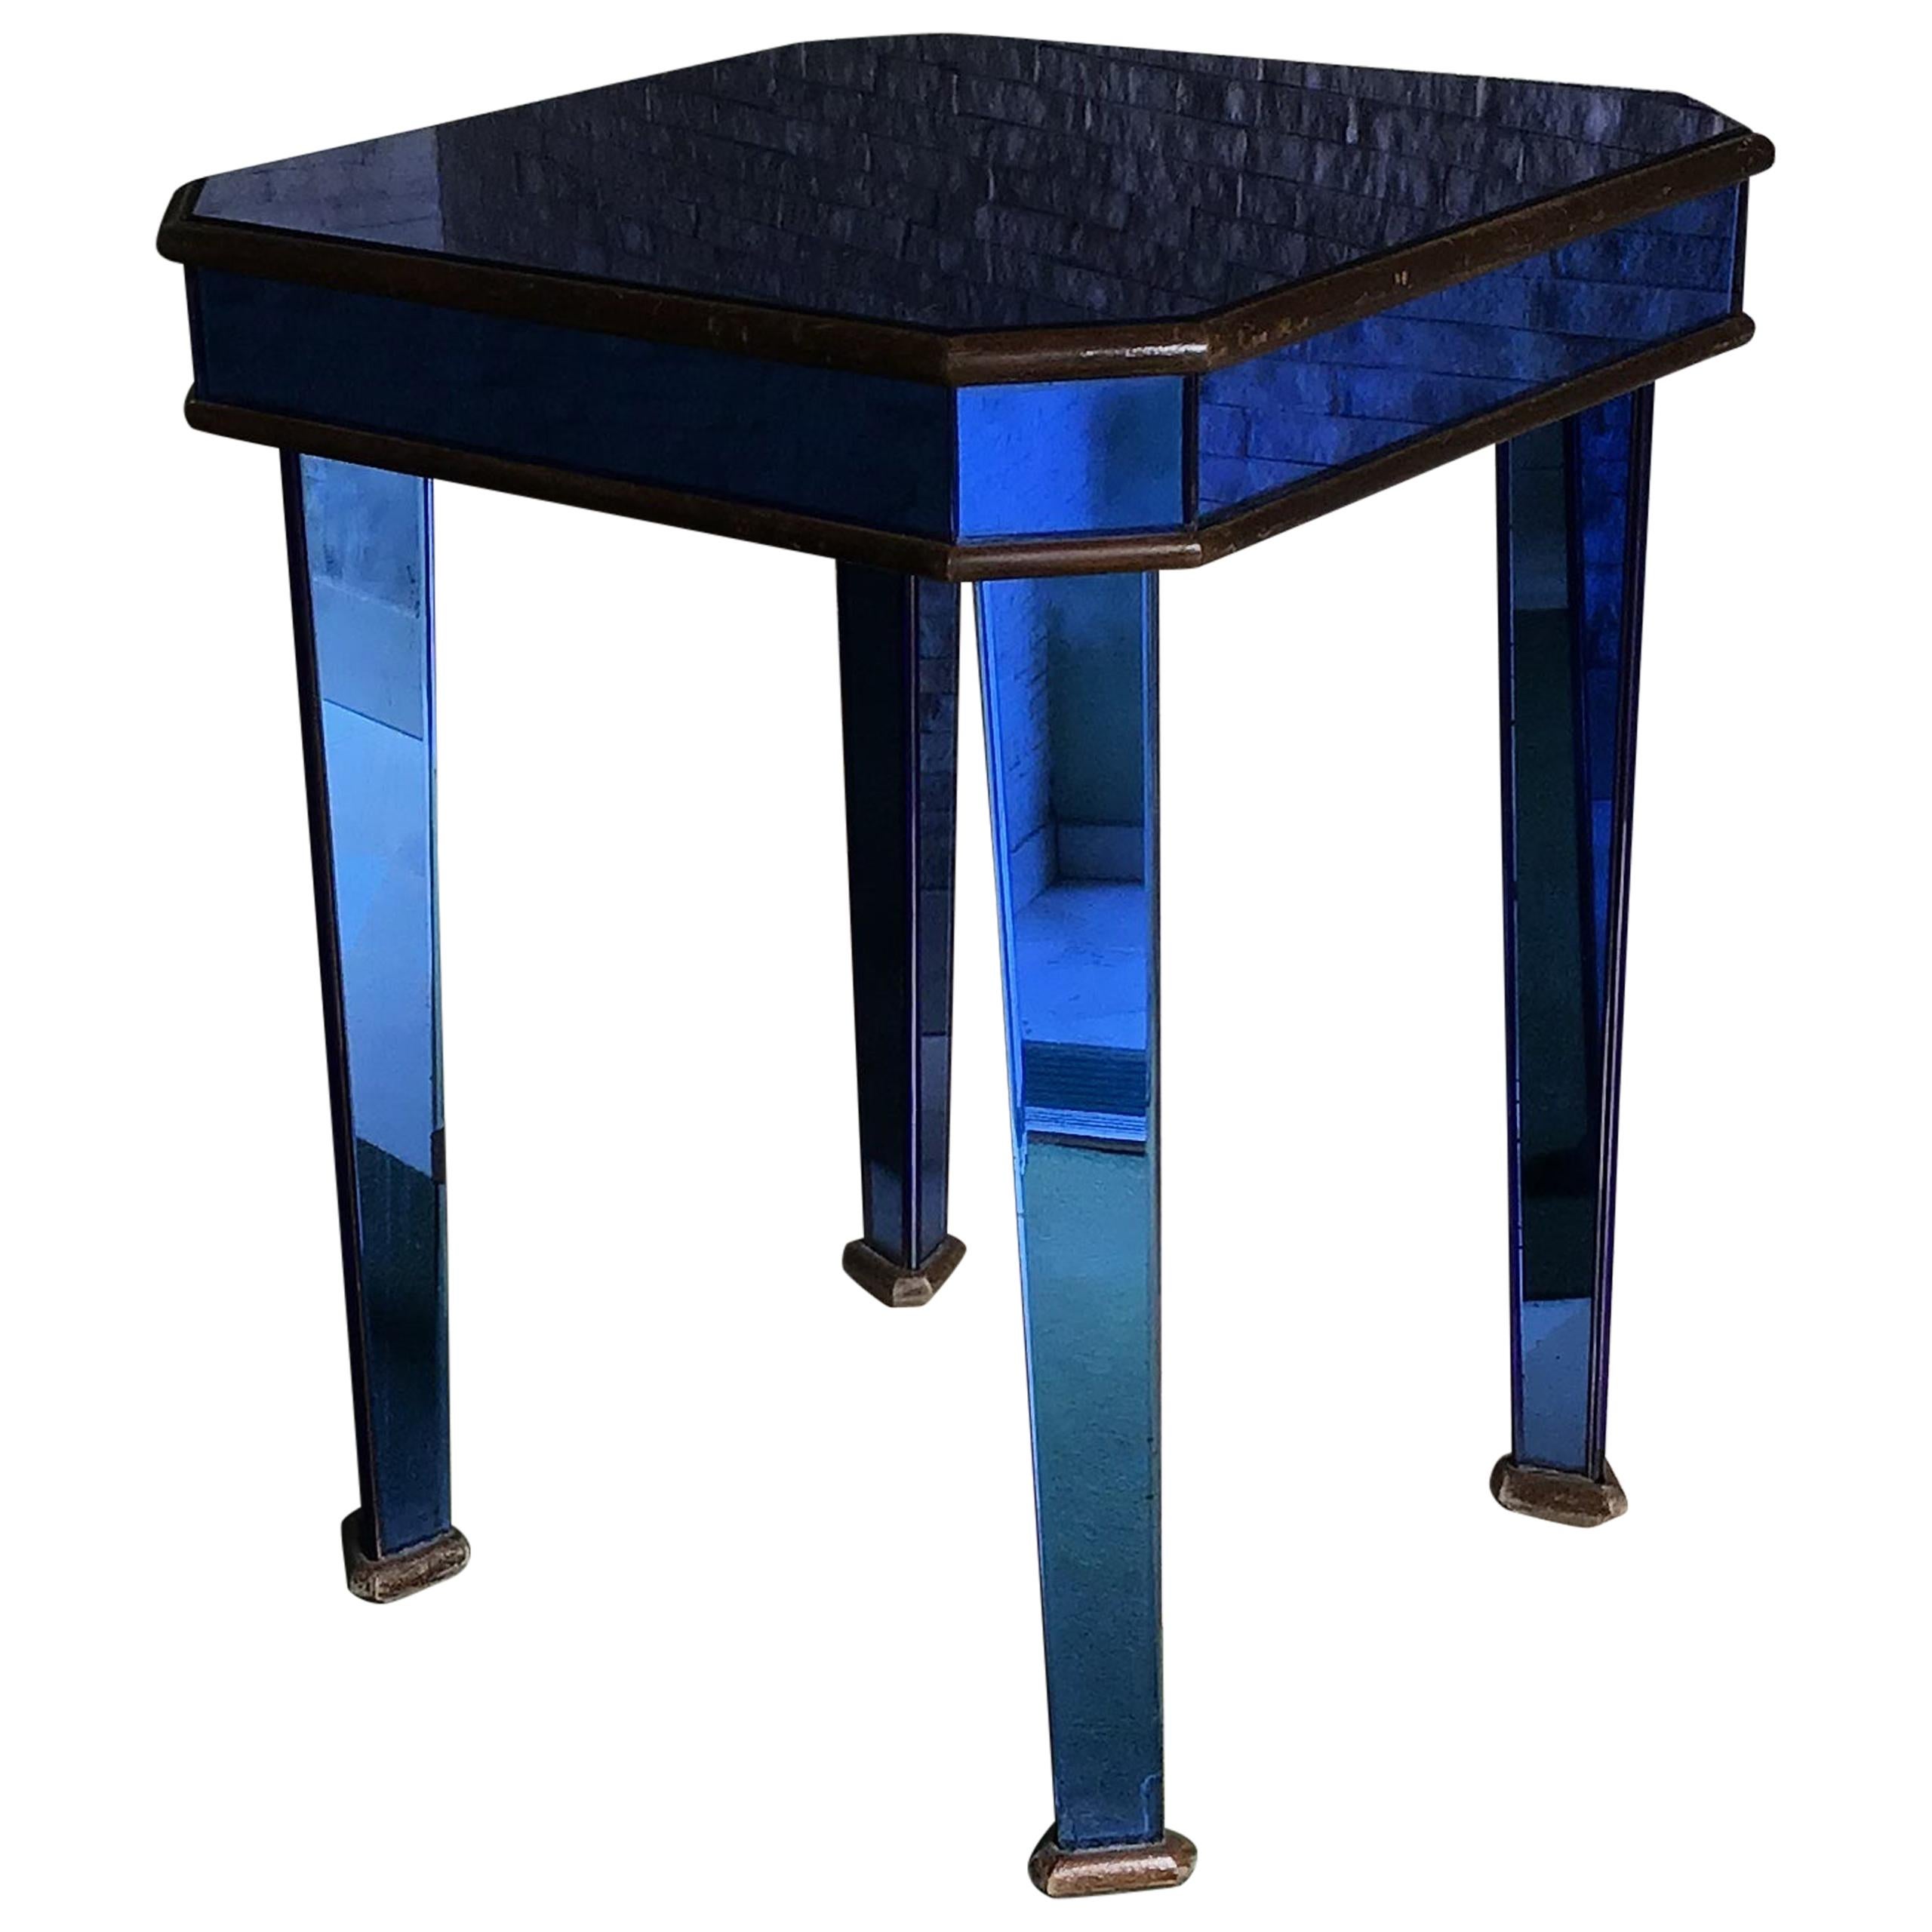 Cristal Art Coffee Table 1950 Blue Mirrored Glass Wood Italy